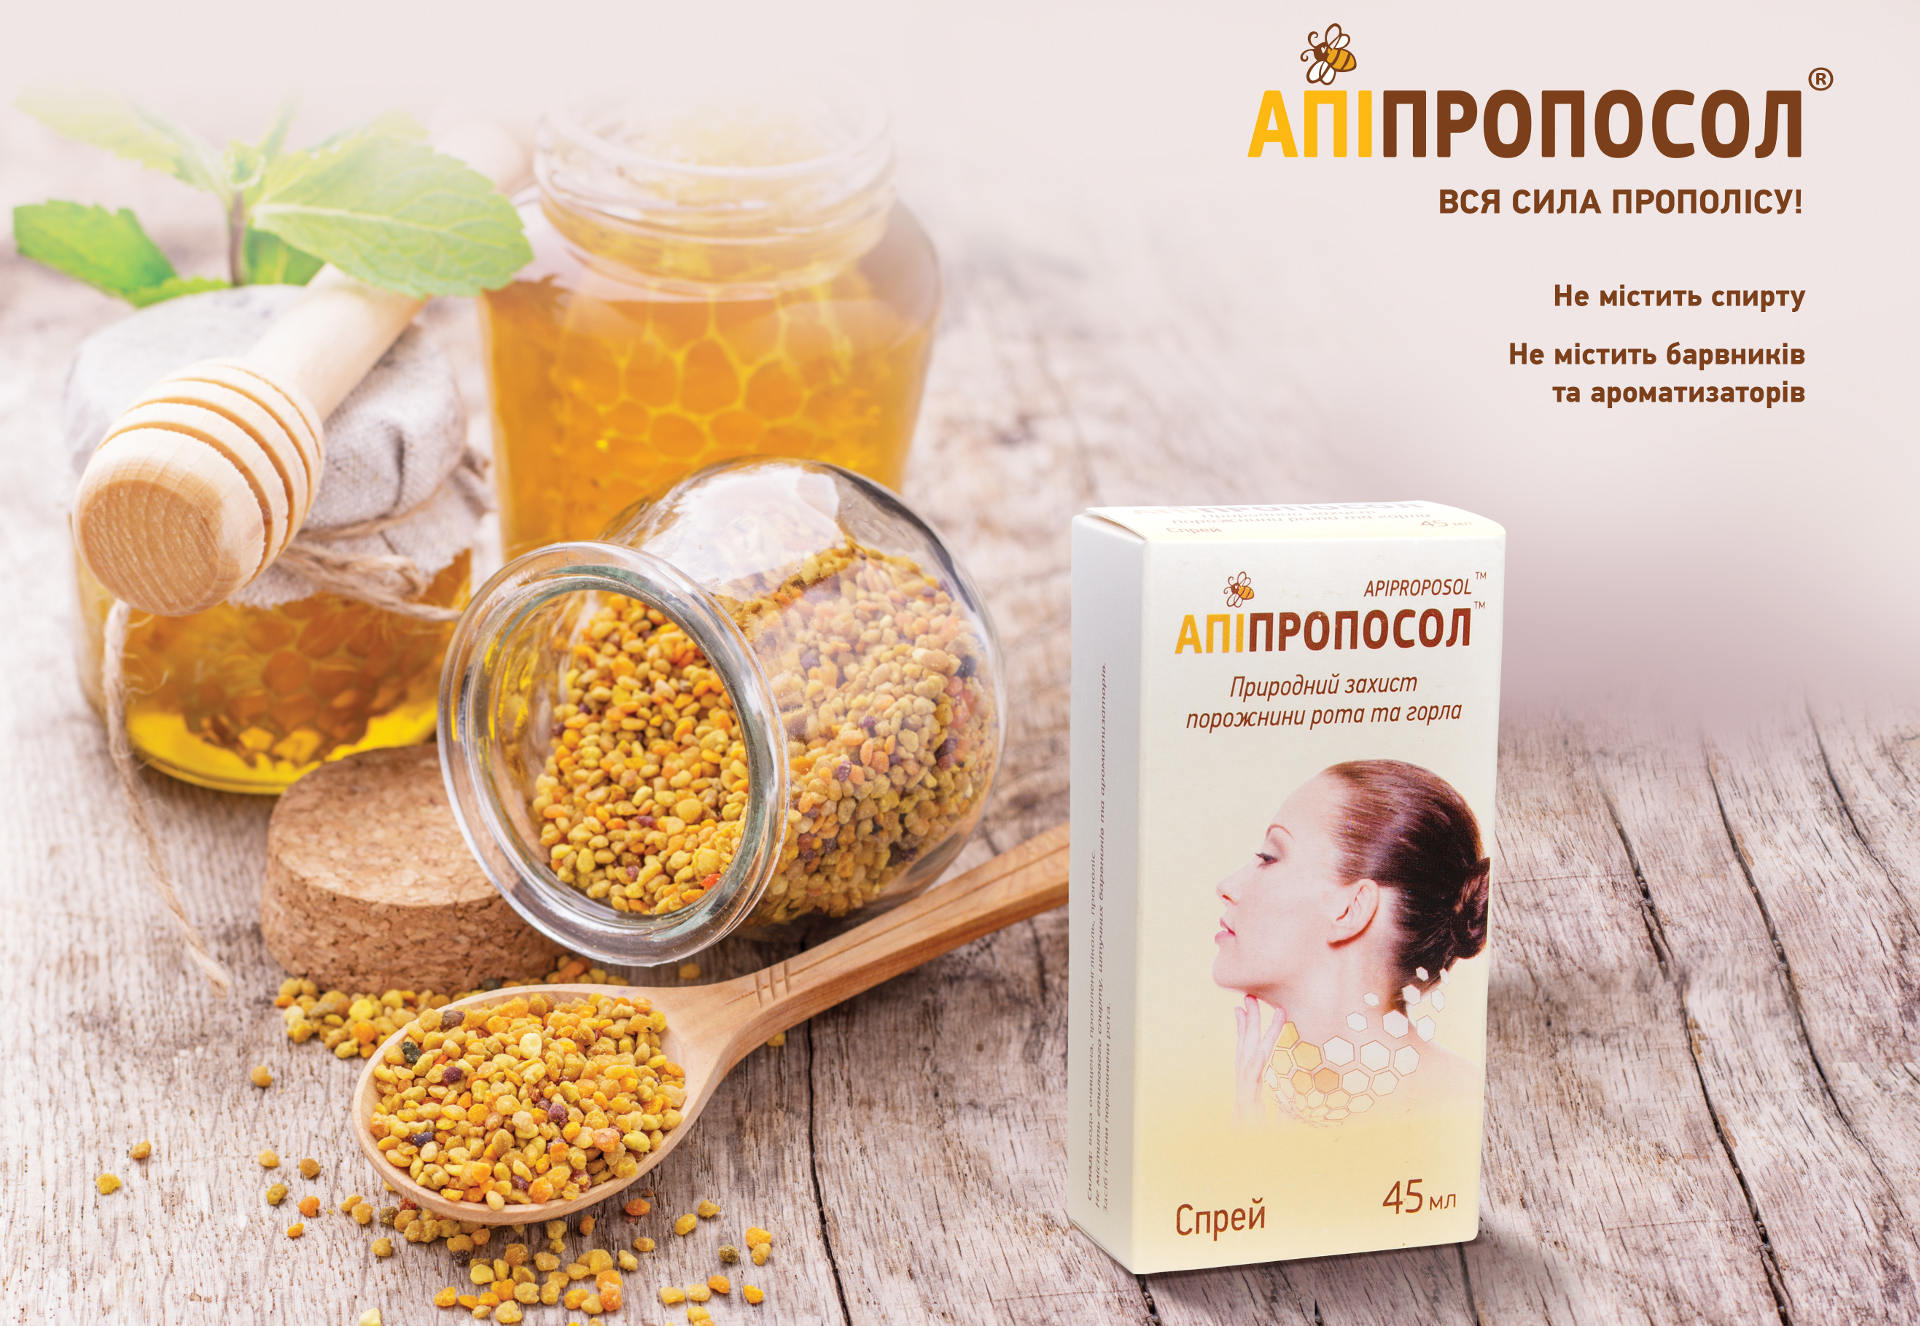 The design of the packaging of a medical preparation. Propolis. Treatment of throat and colds.